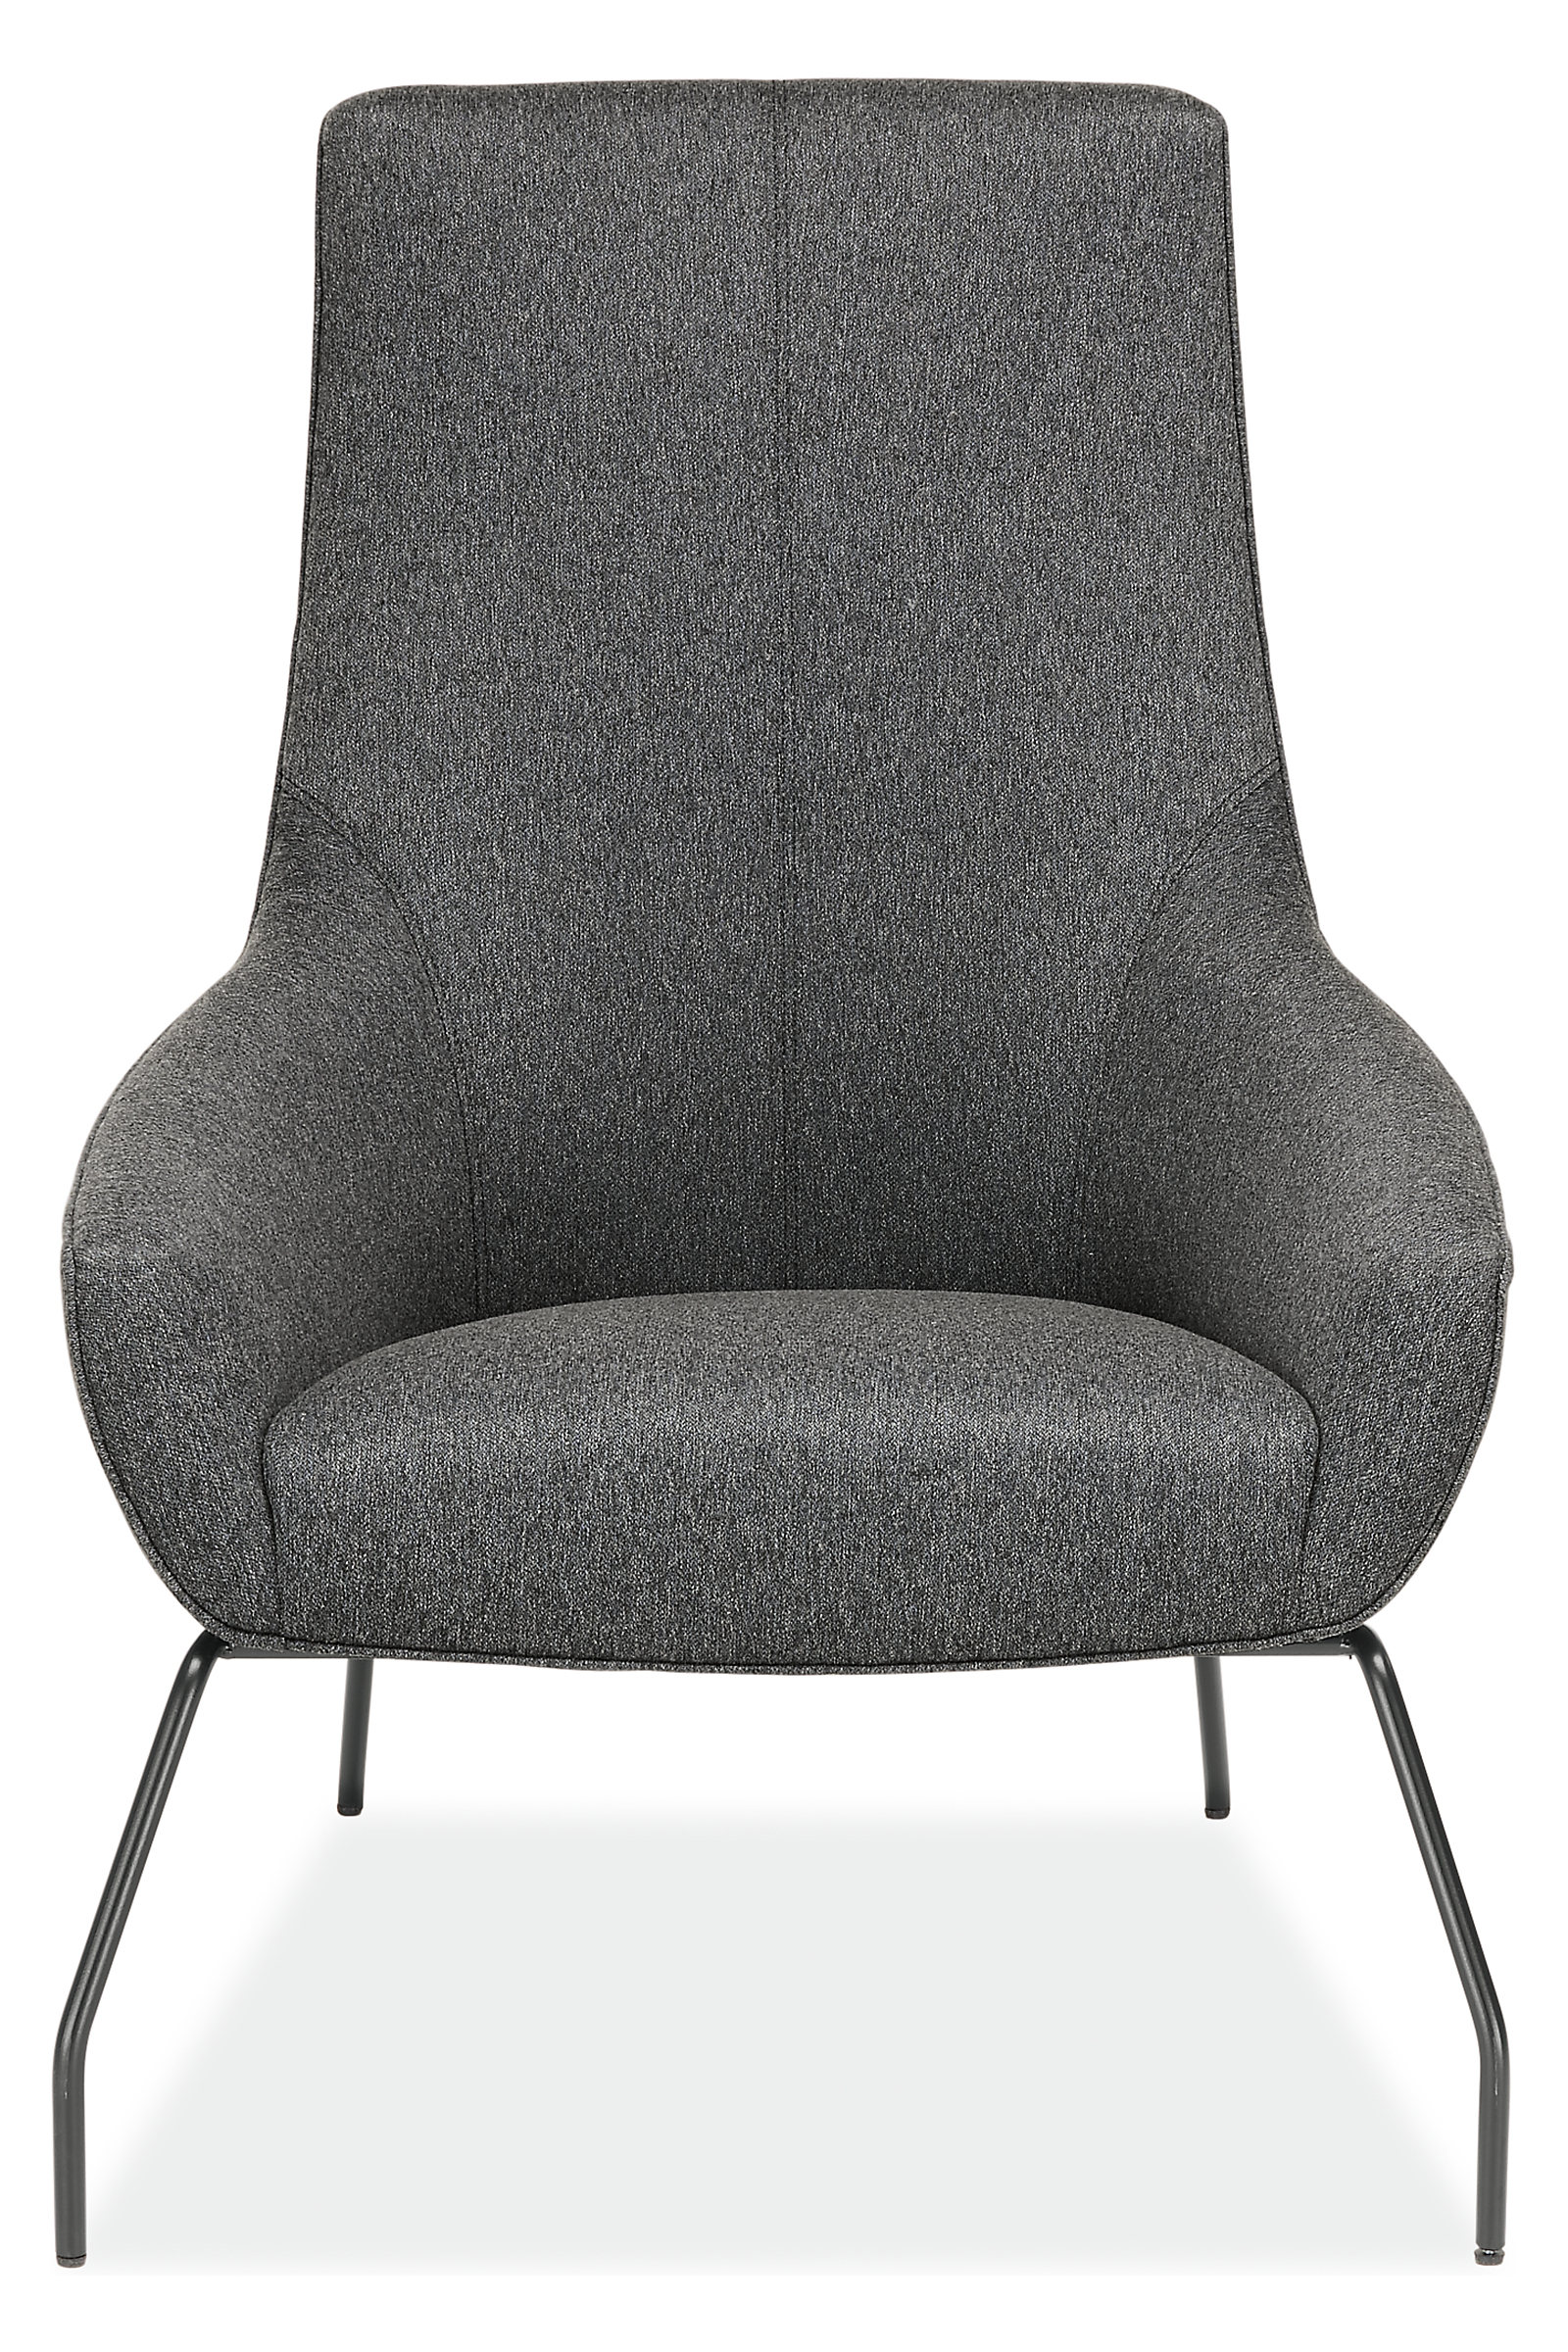 Angled view of Rhodes Lounge Chair in Flint Fabric.